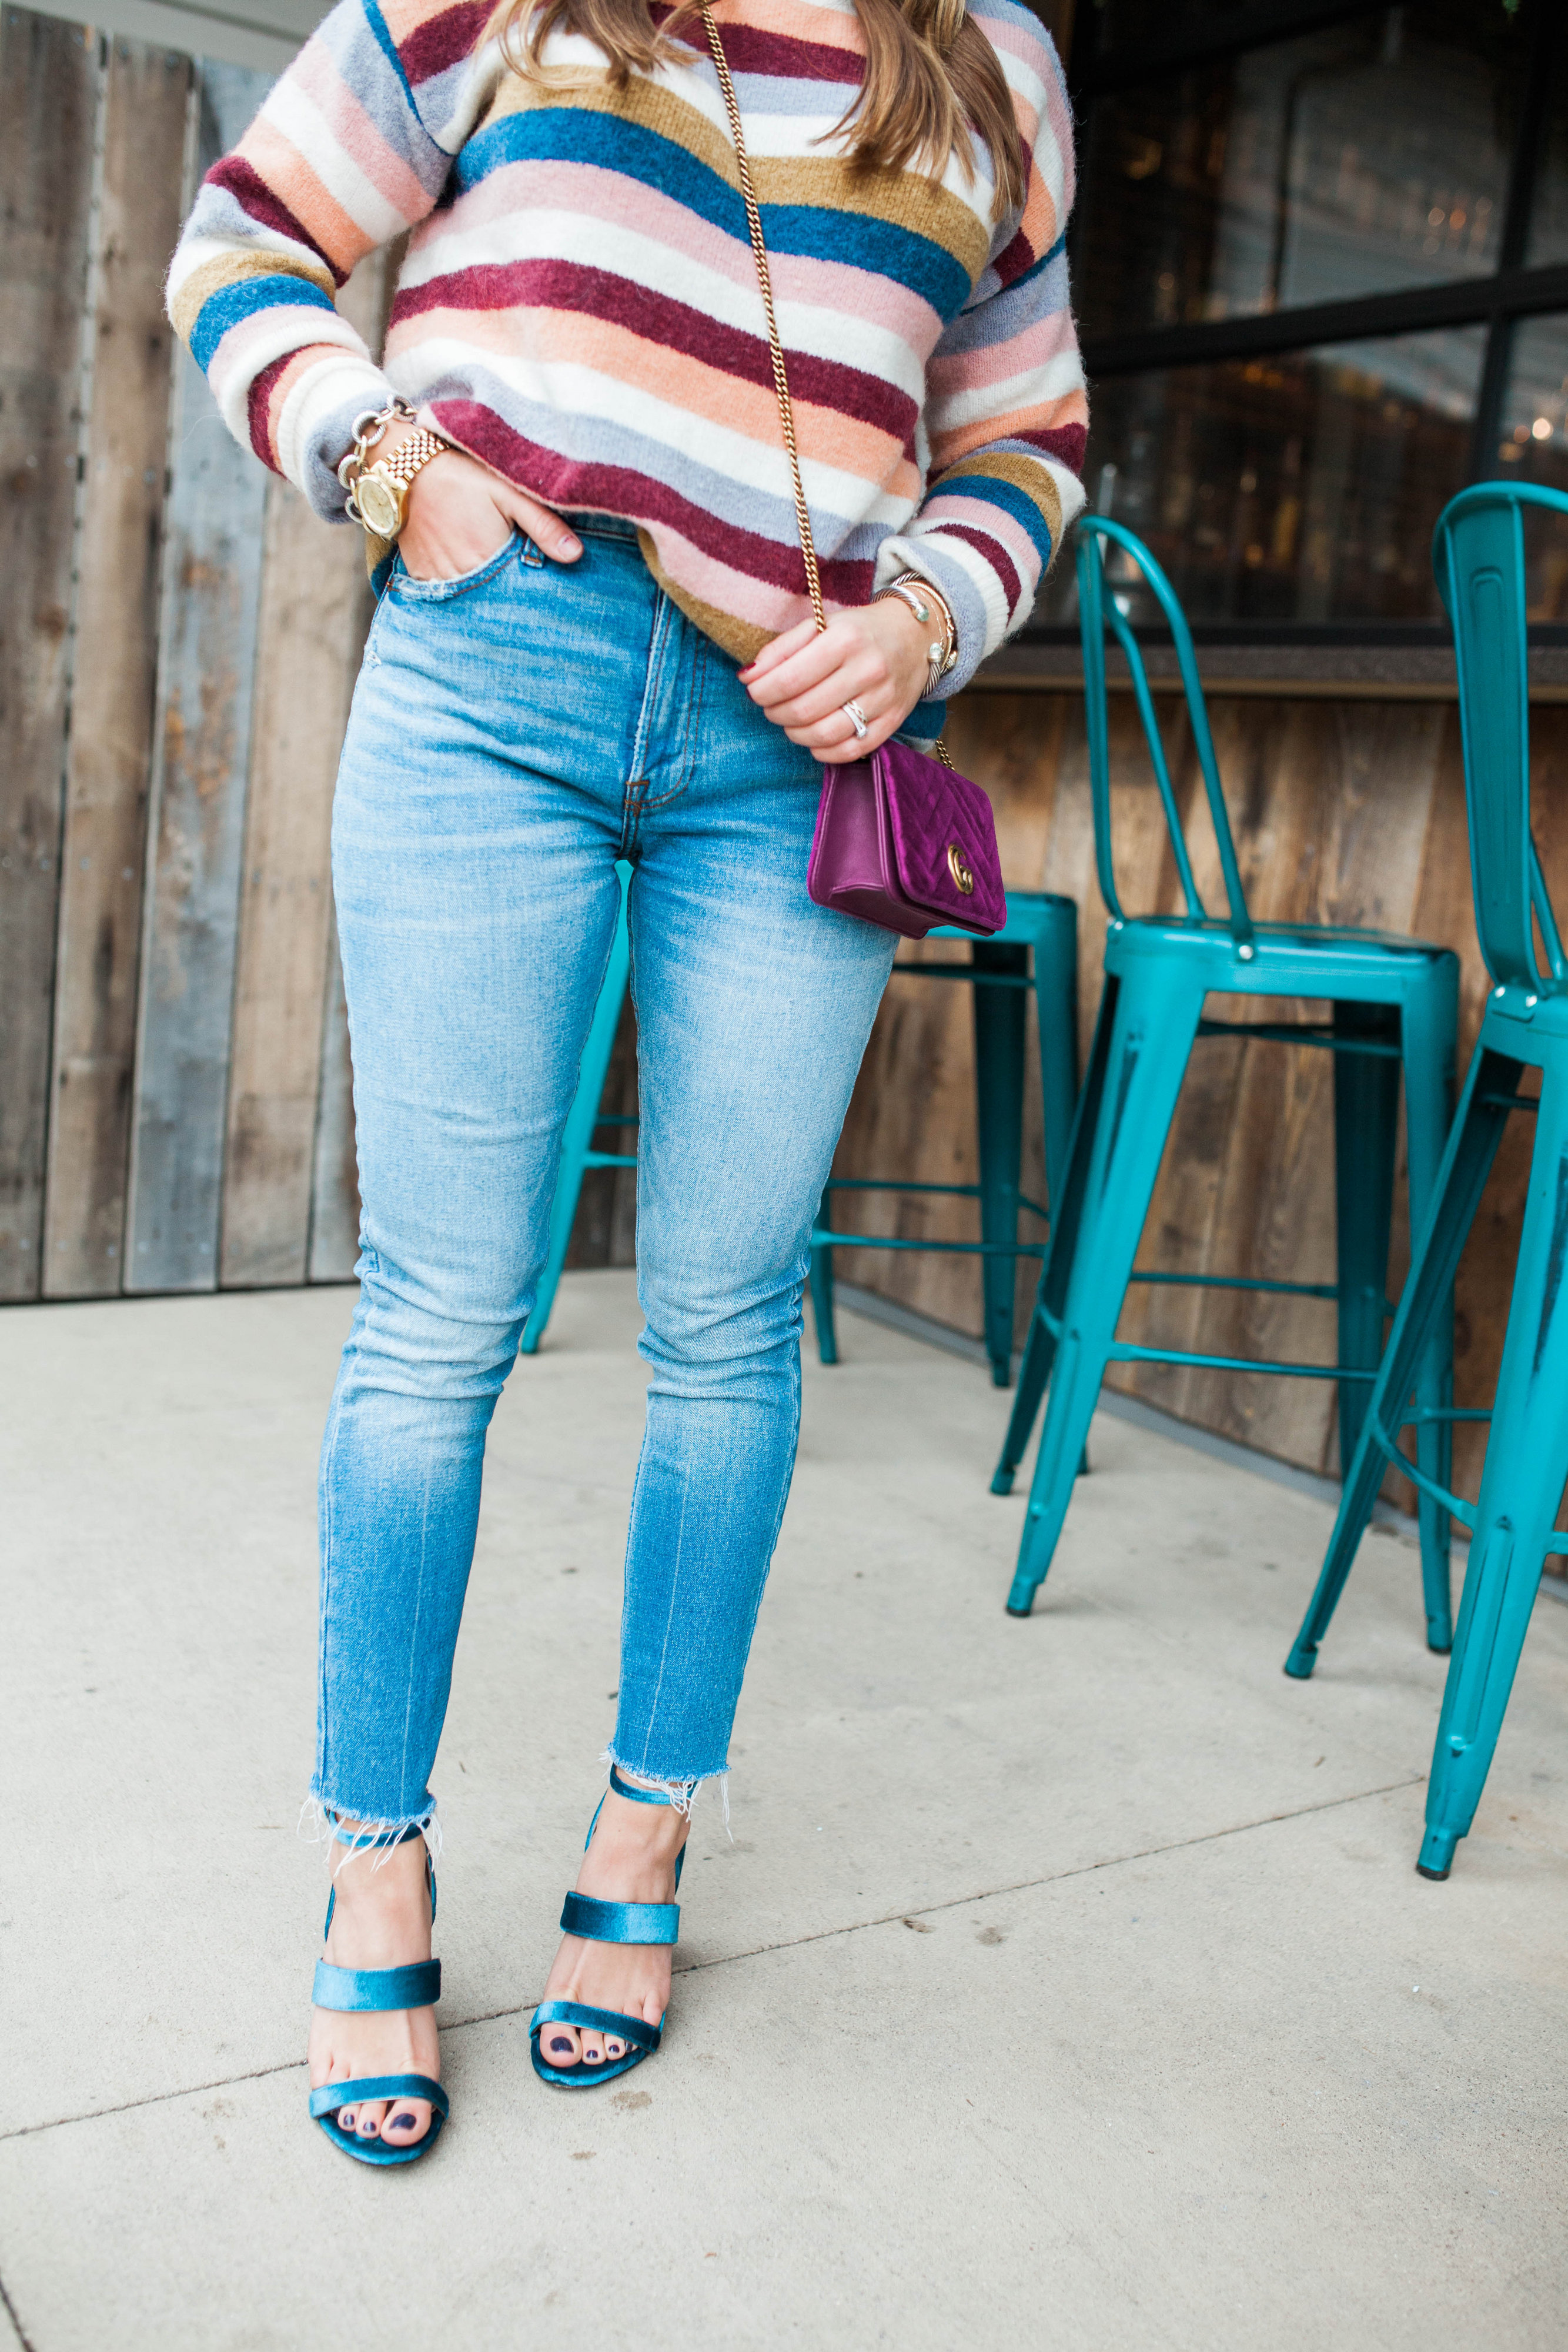 Fall Stripes / Thanksgiving outfit idea